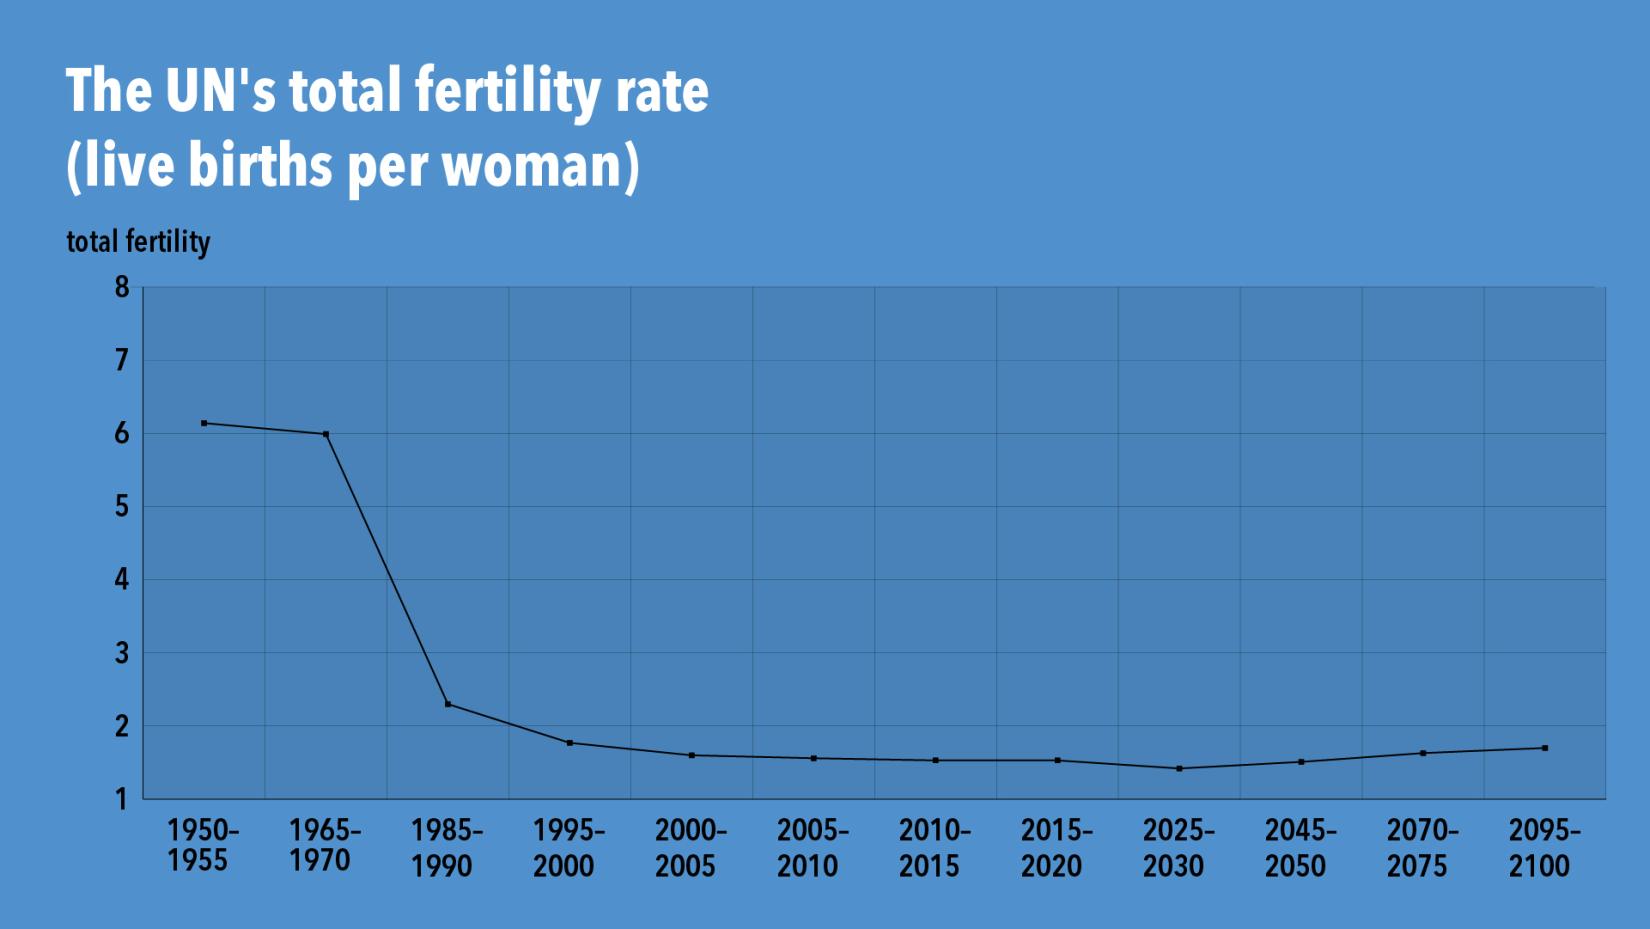 Thailand’s population aging is mainly caused by the reduction in total fertility